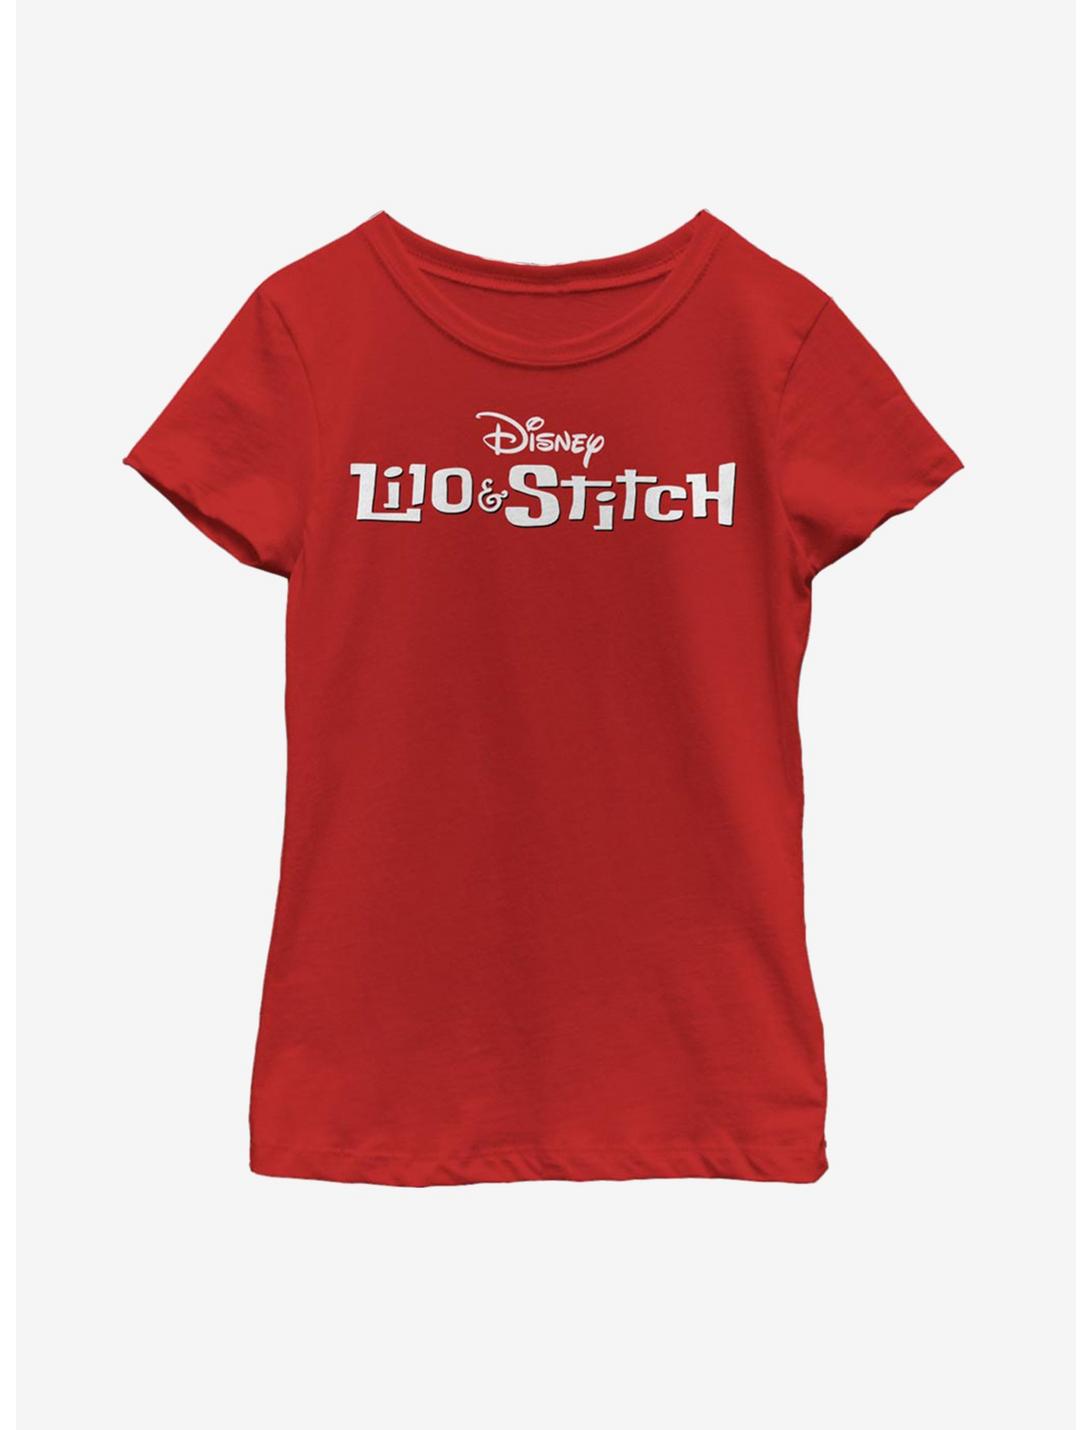 Disney Lilo And Stitch Classic Logo Youth Girls T-Shirt, RED, hi-res